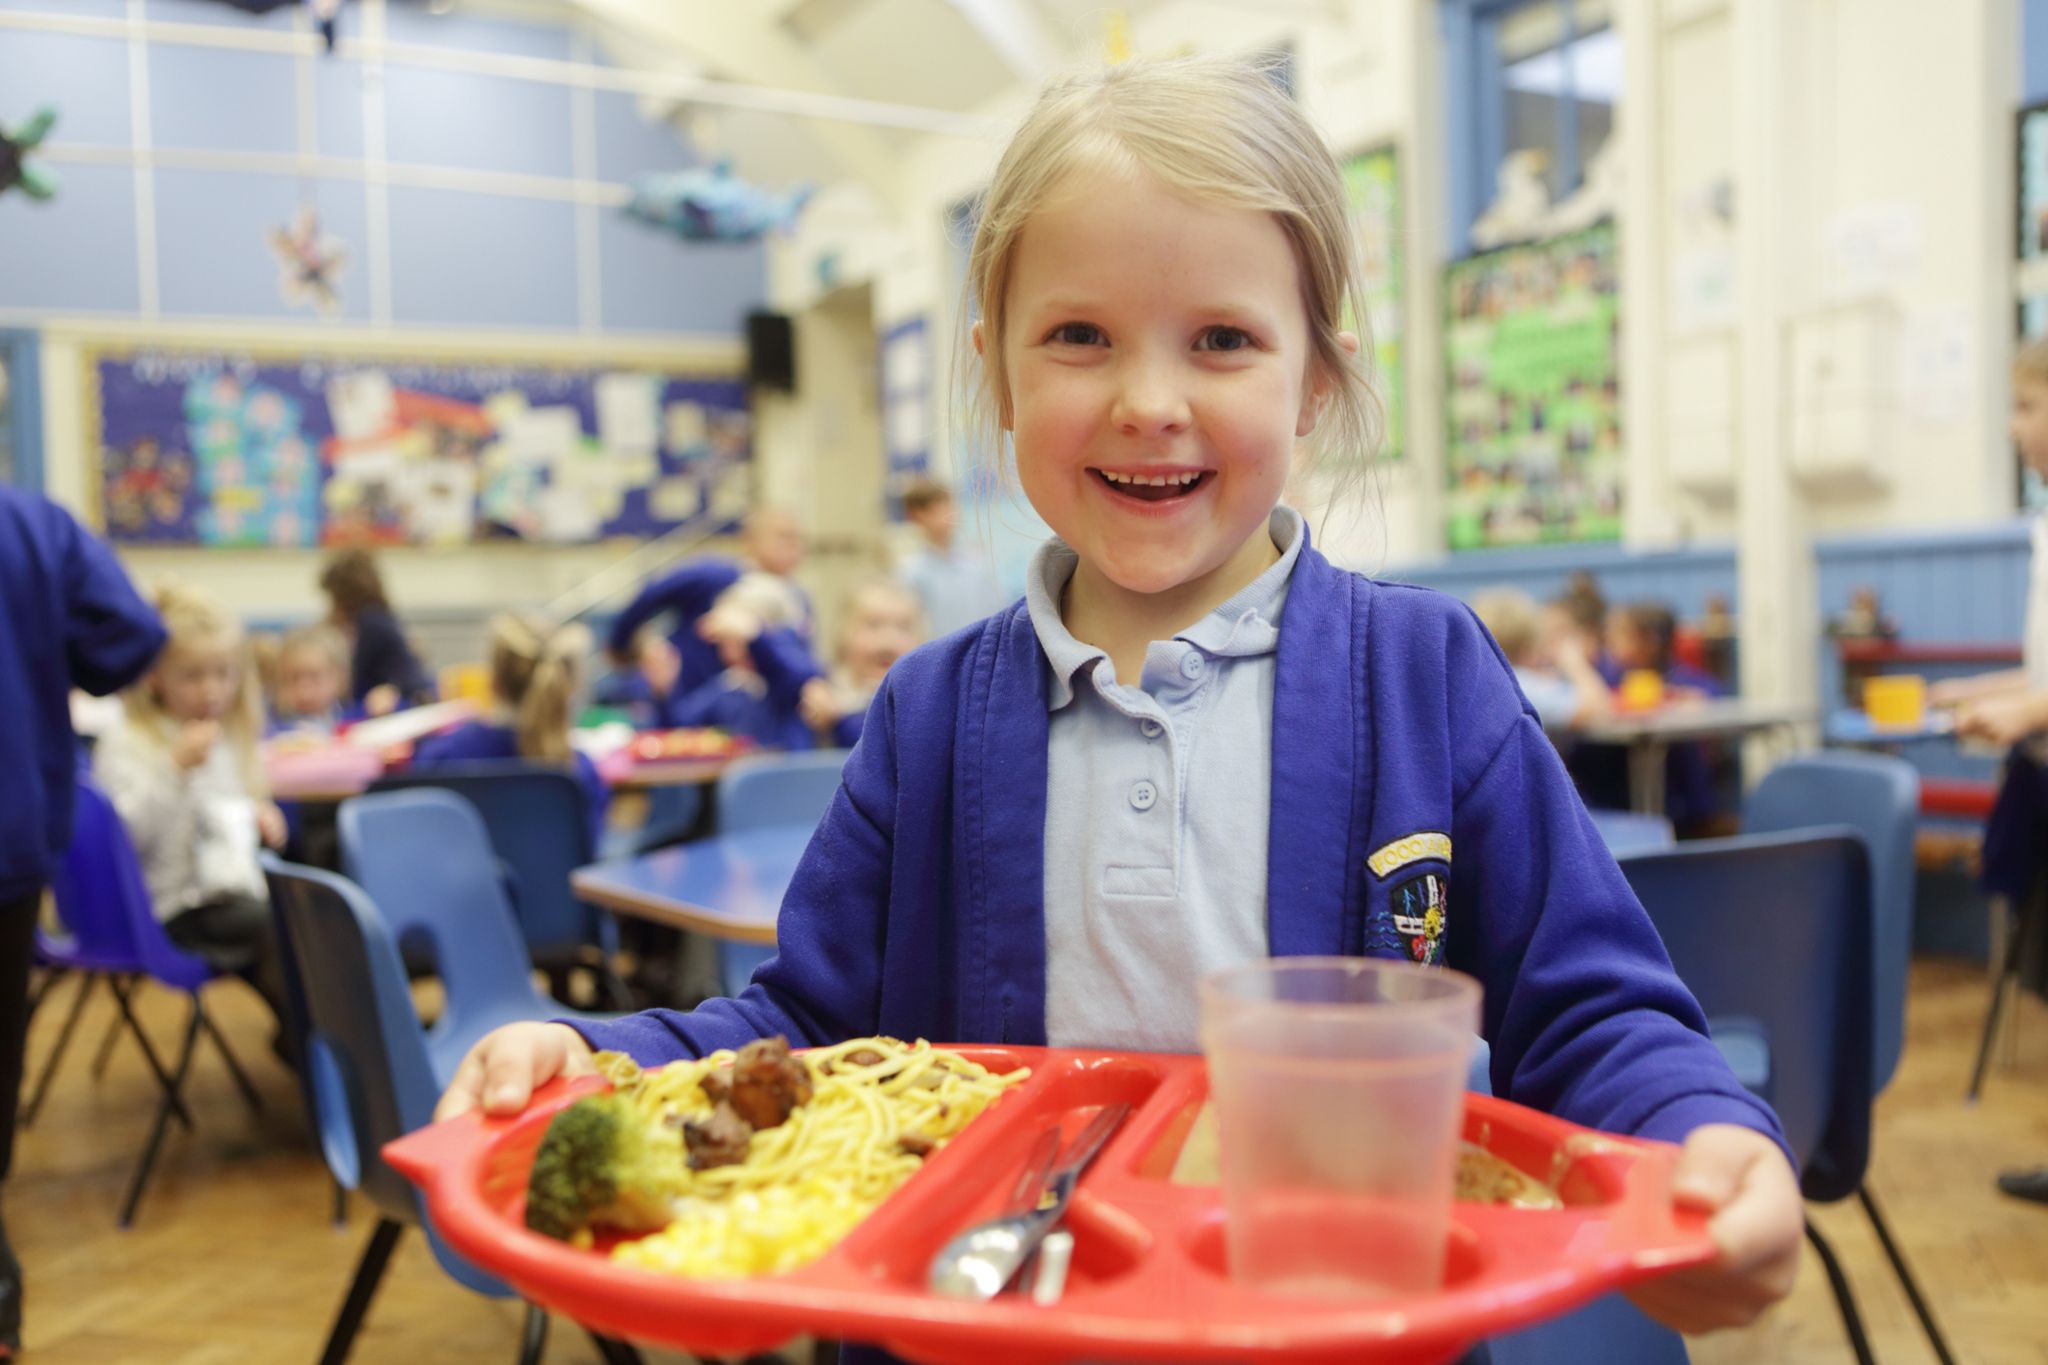 Girl with lunch in school dining hall - stock photo